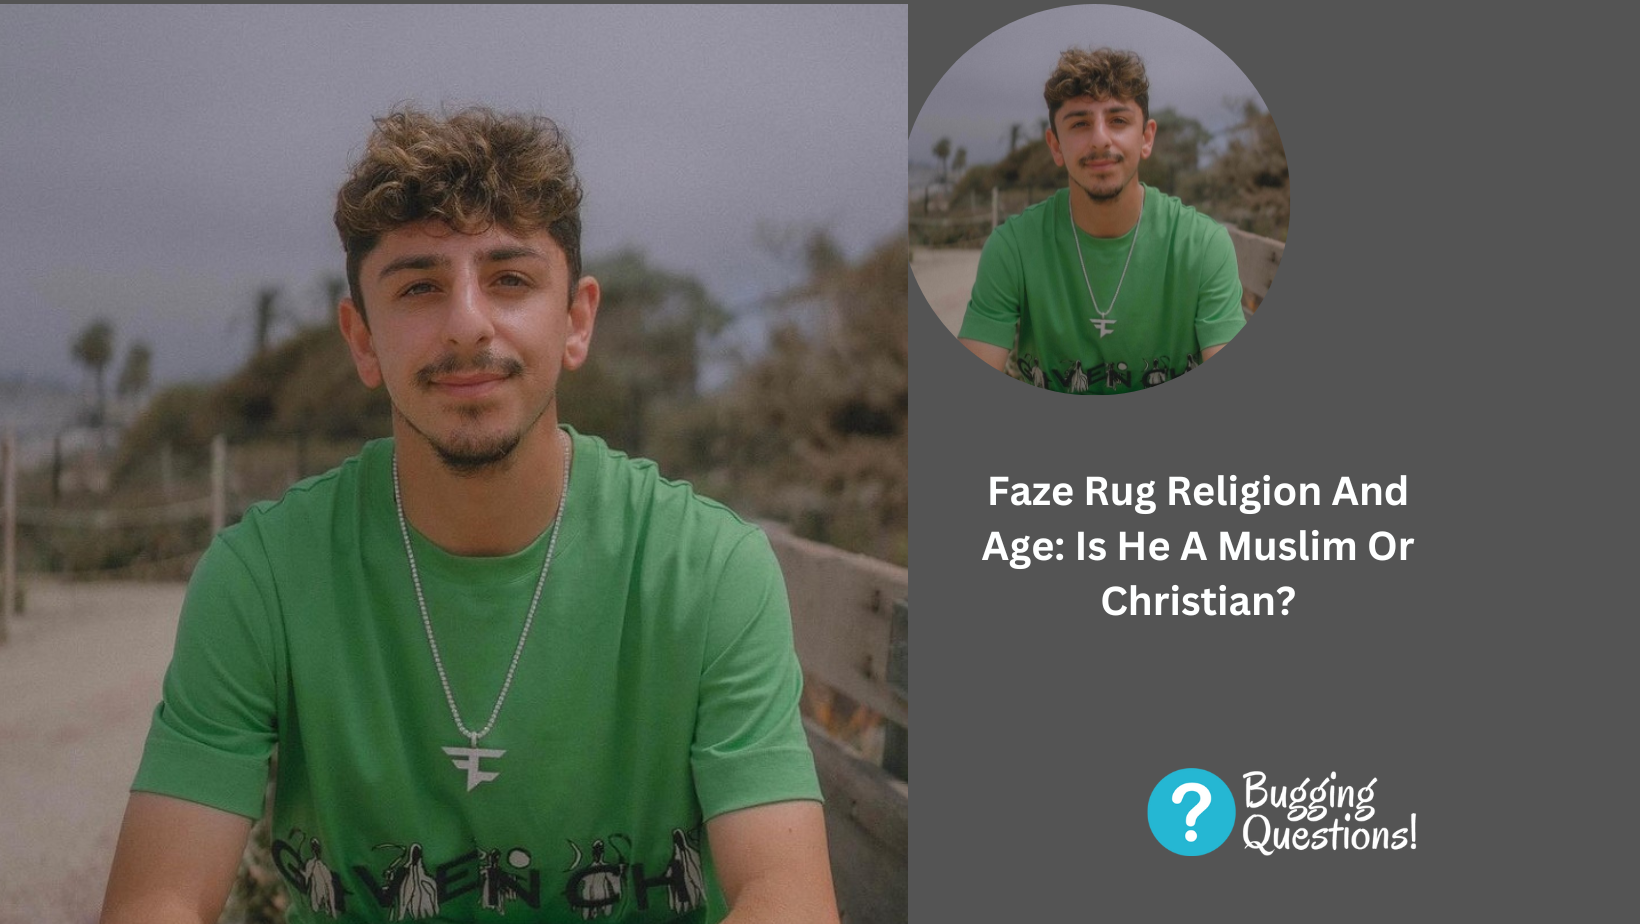 Faze Rug Religion And Age: Is He A Muslim Or Christian?